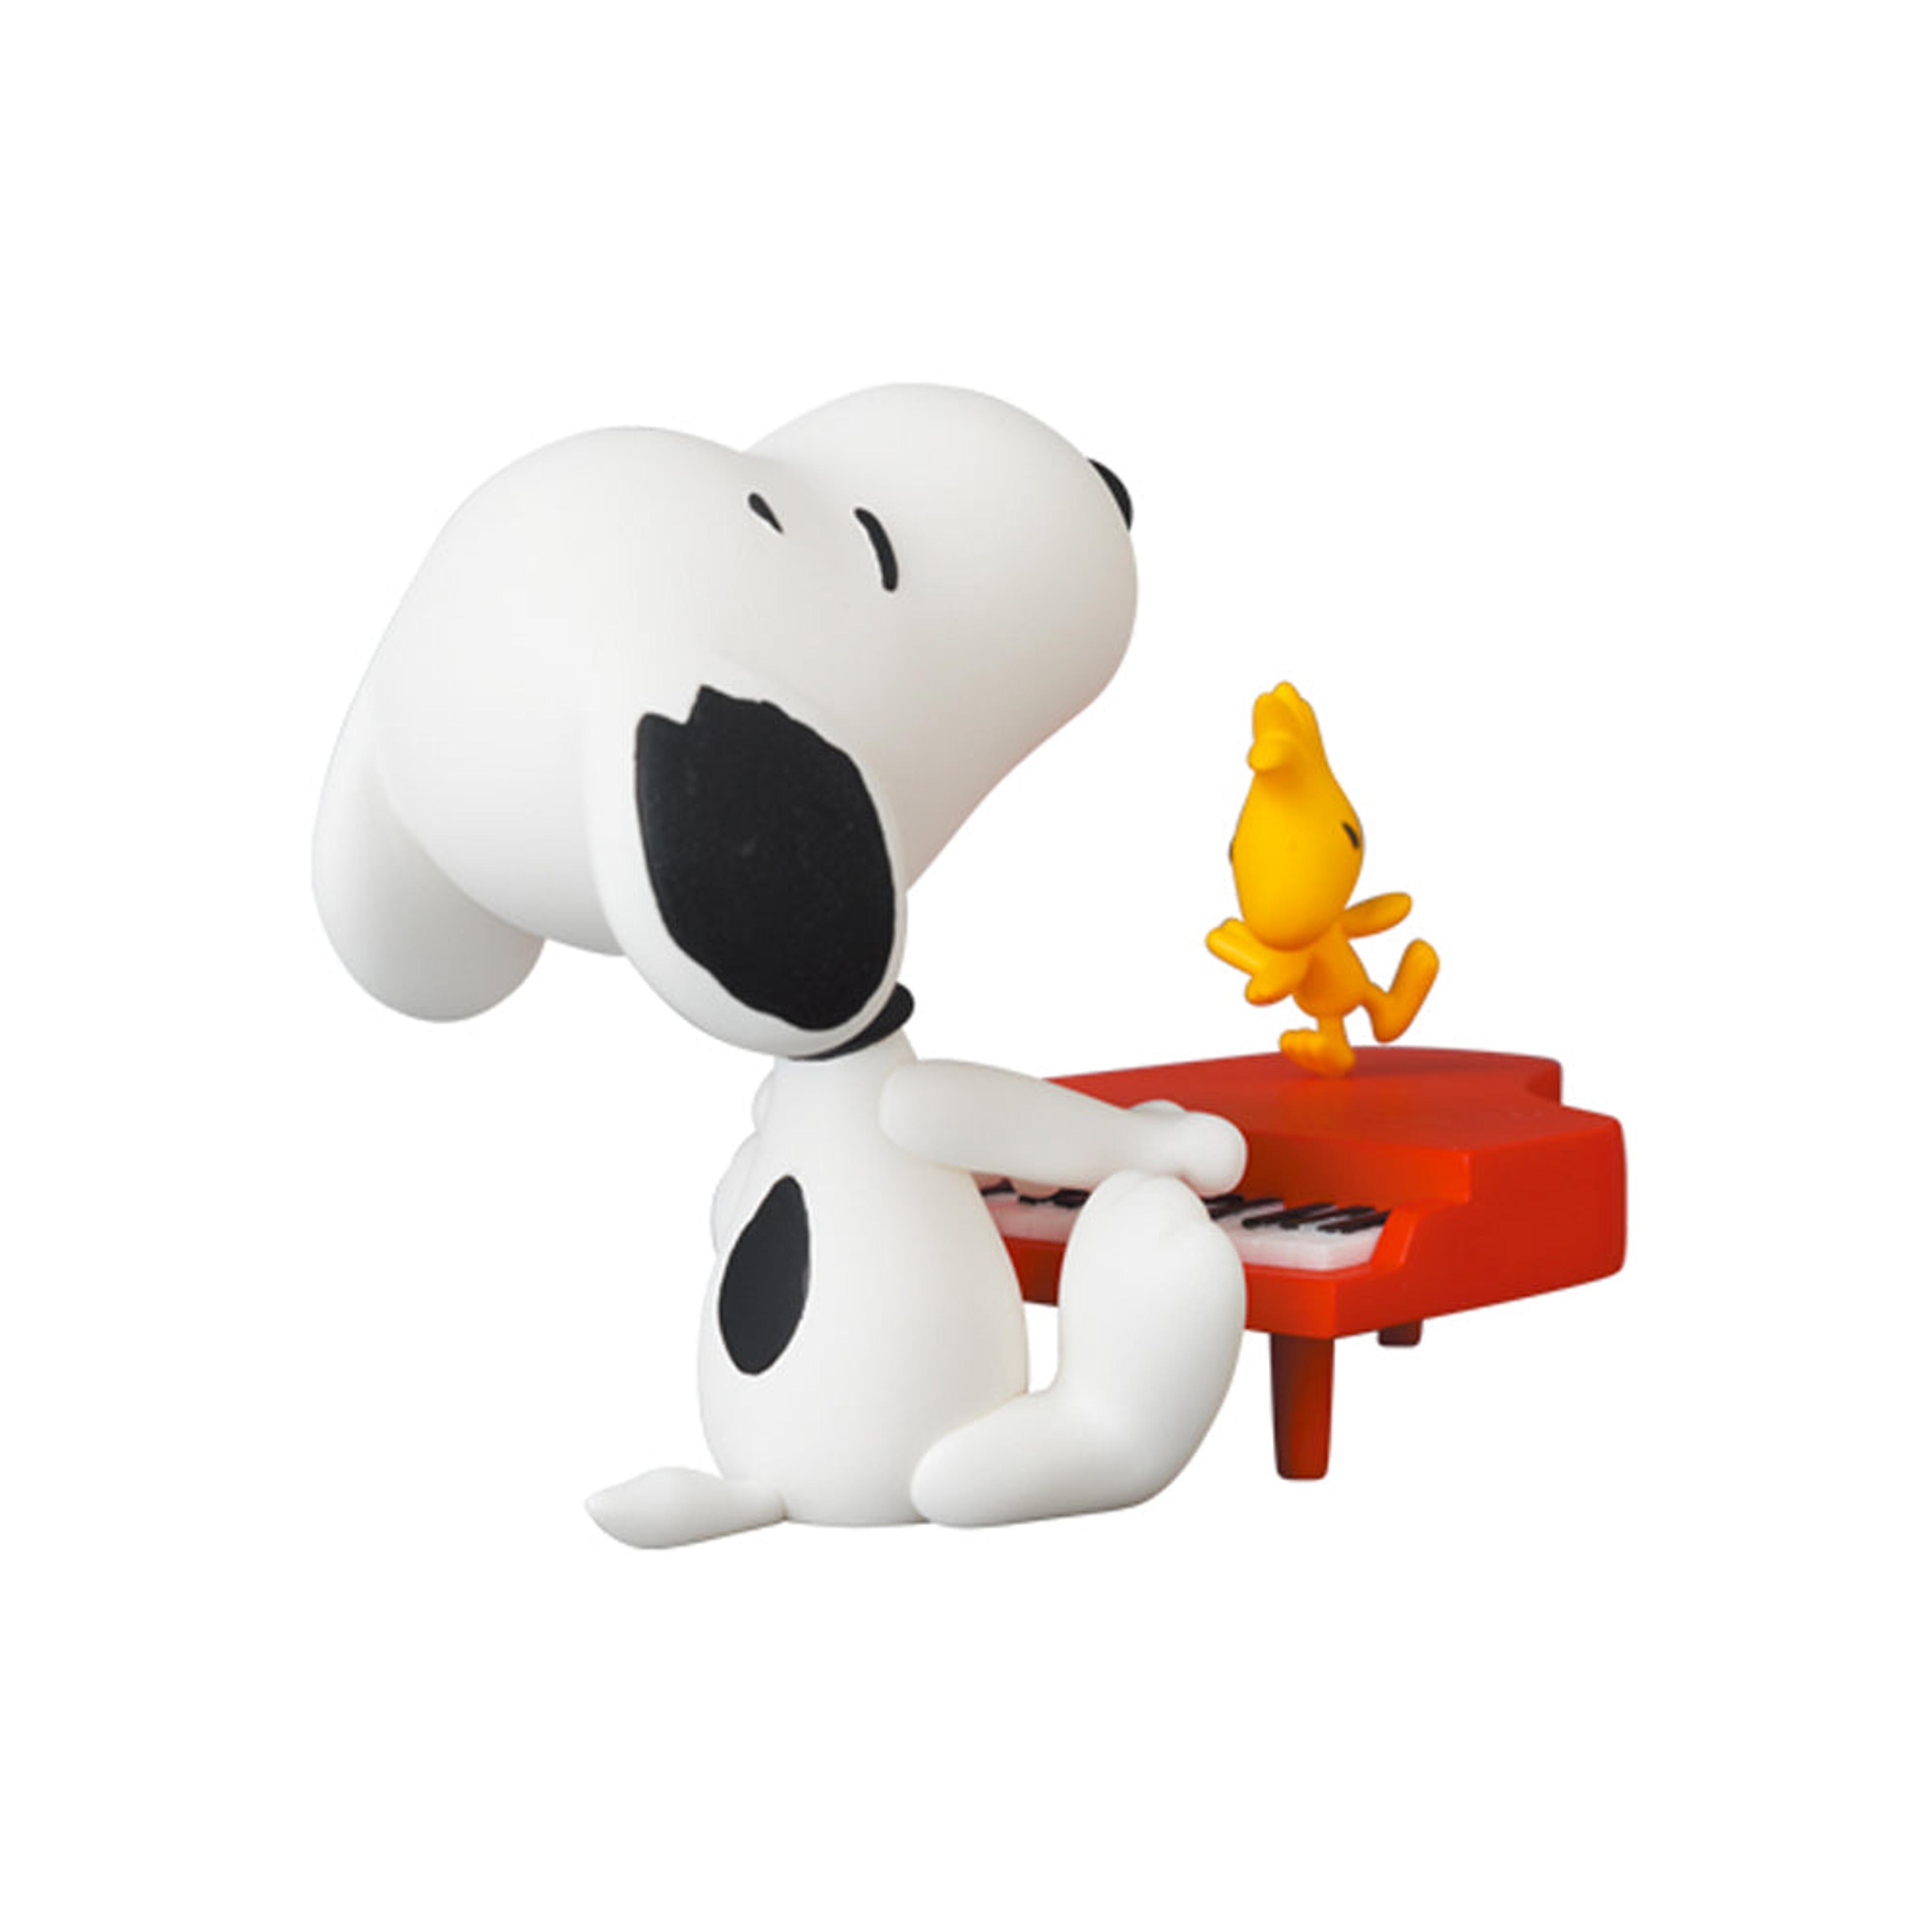 Alternate View 2 of UDF Peanuts Series 13: Pianist Snoopy Ultra Detail Figure by Med